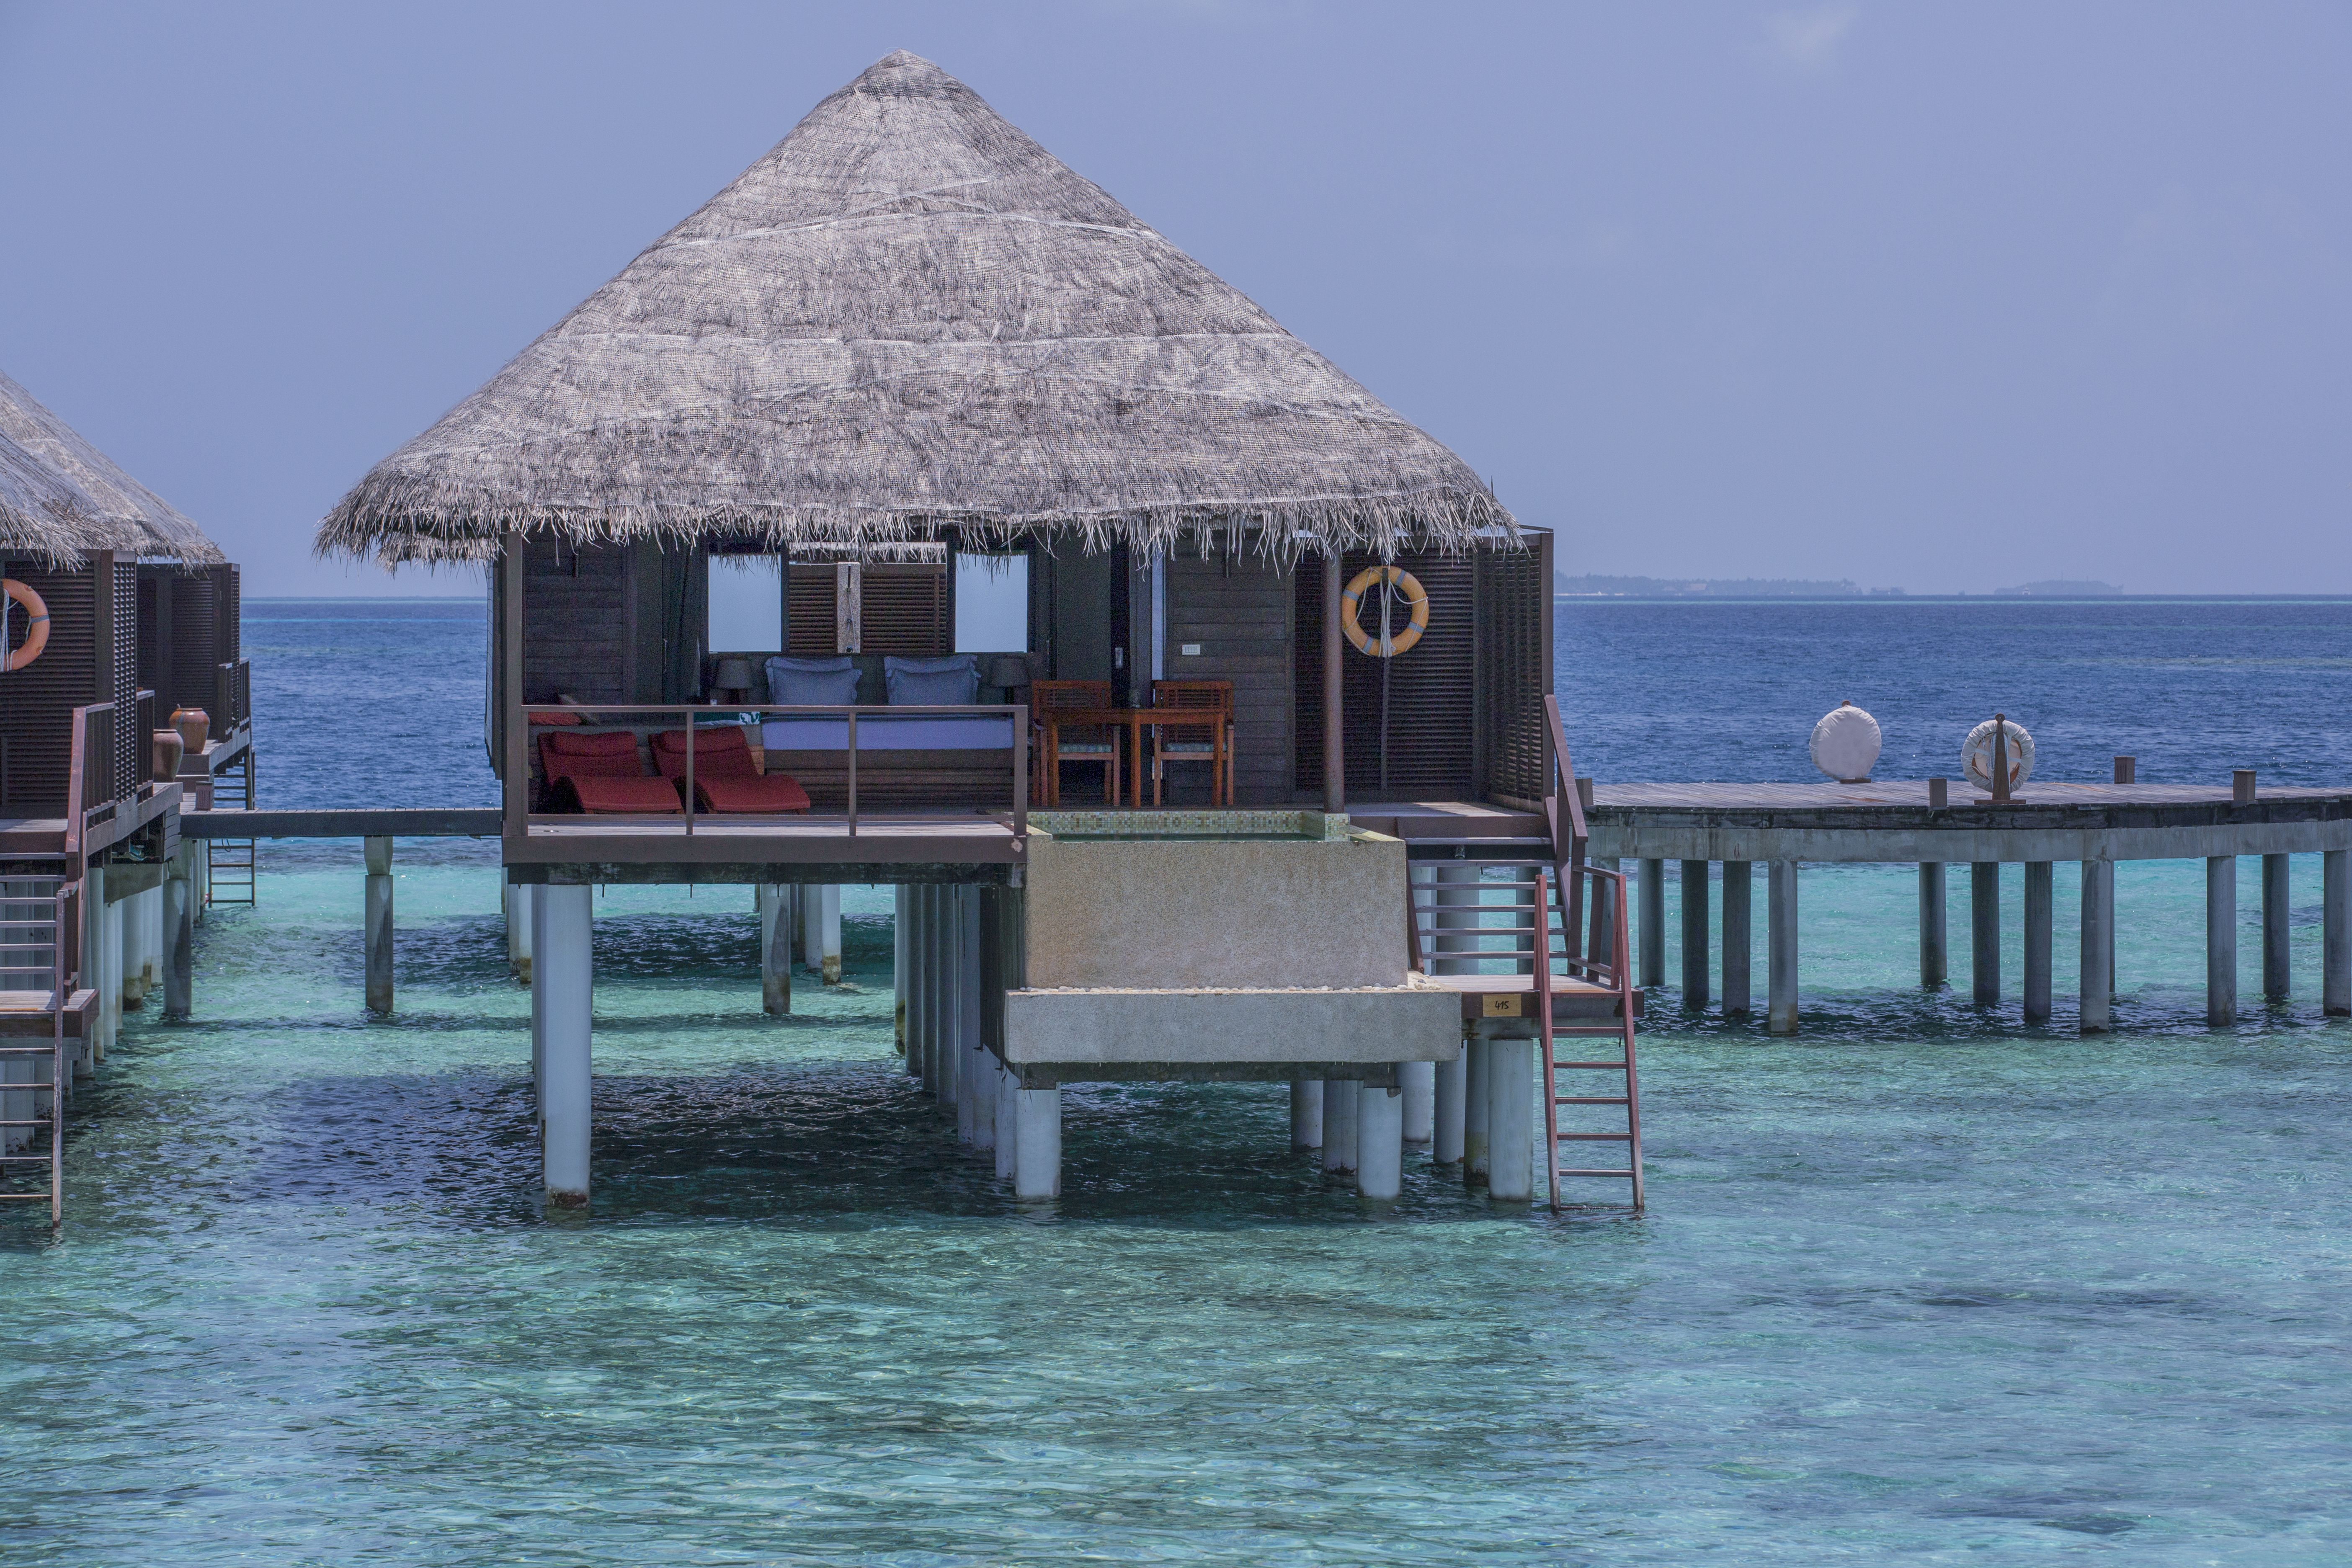 And this is just one of the regular water villas.